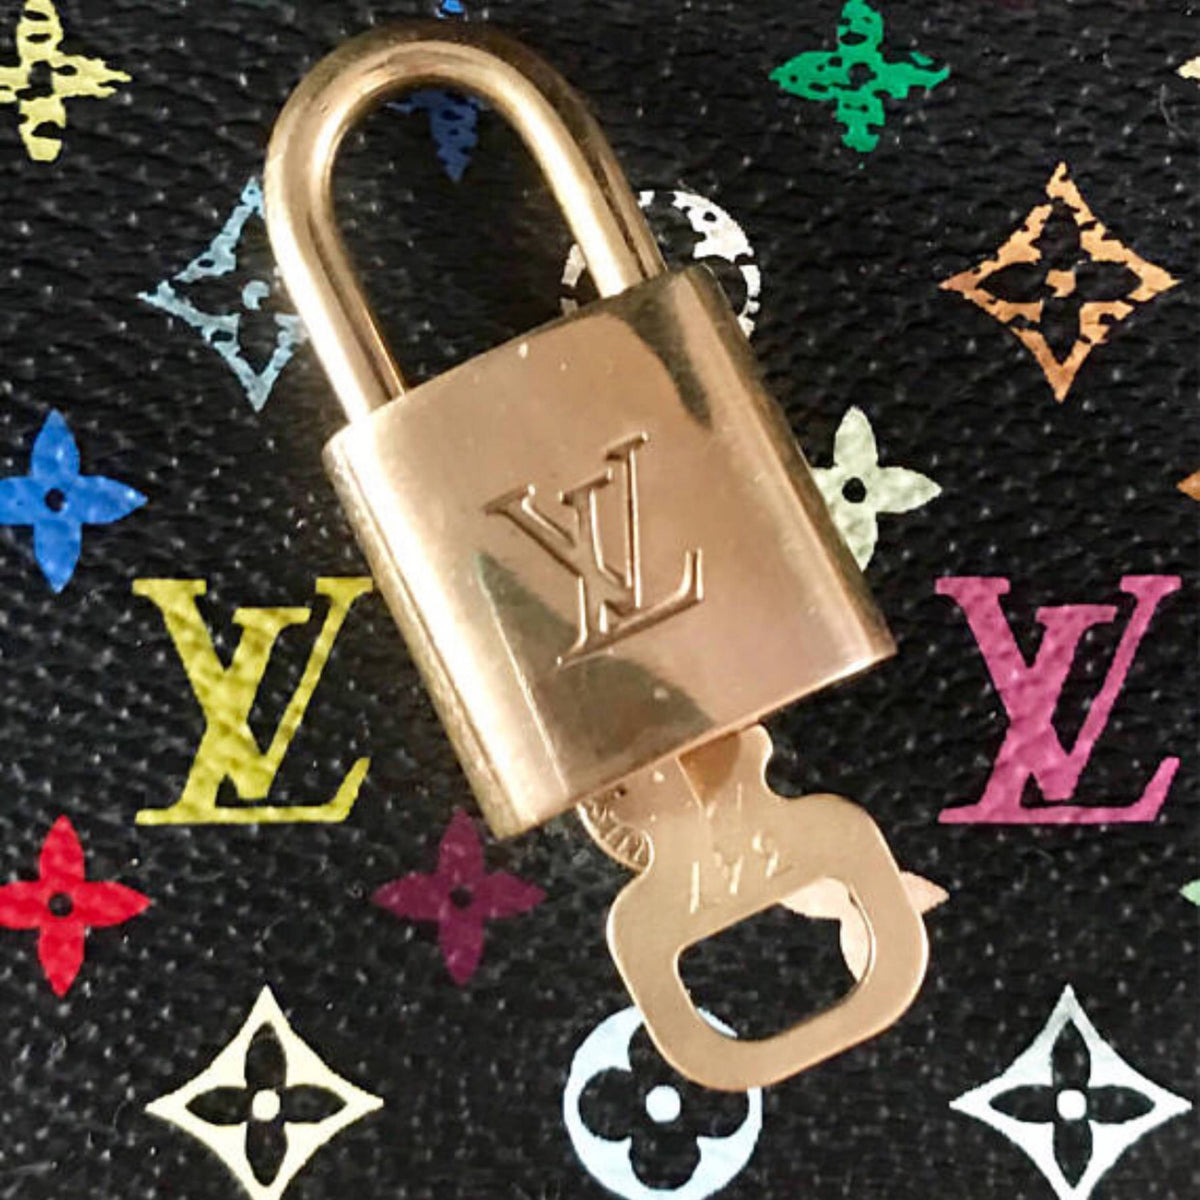 Lot 999 - Two Louis Vuitton lock and keys.